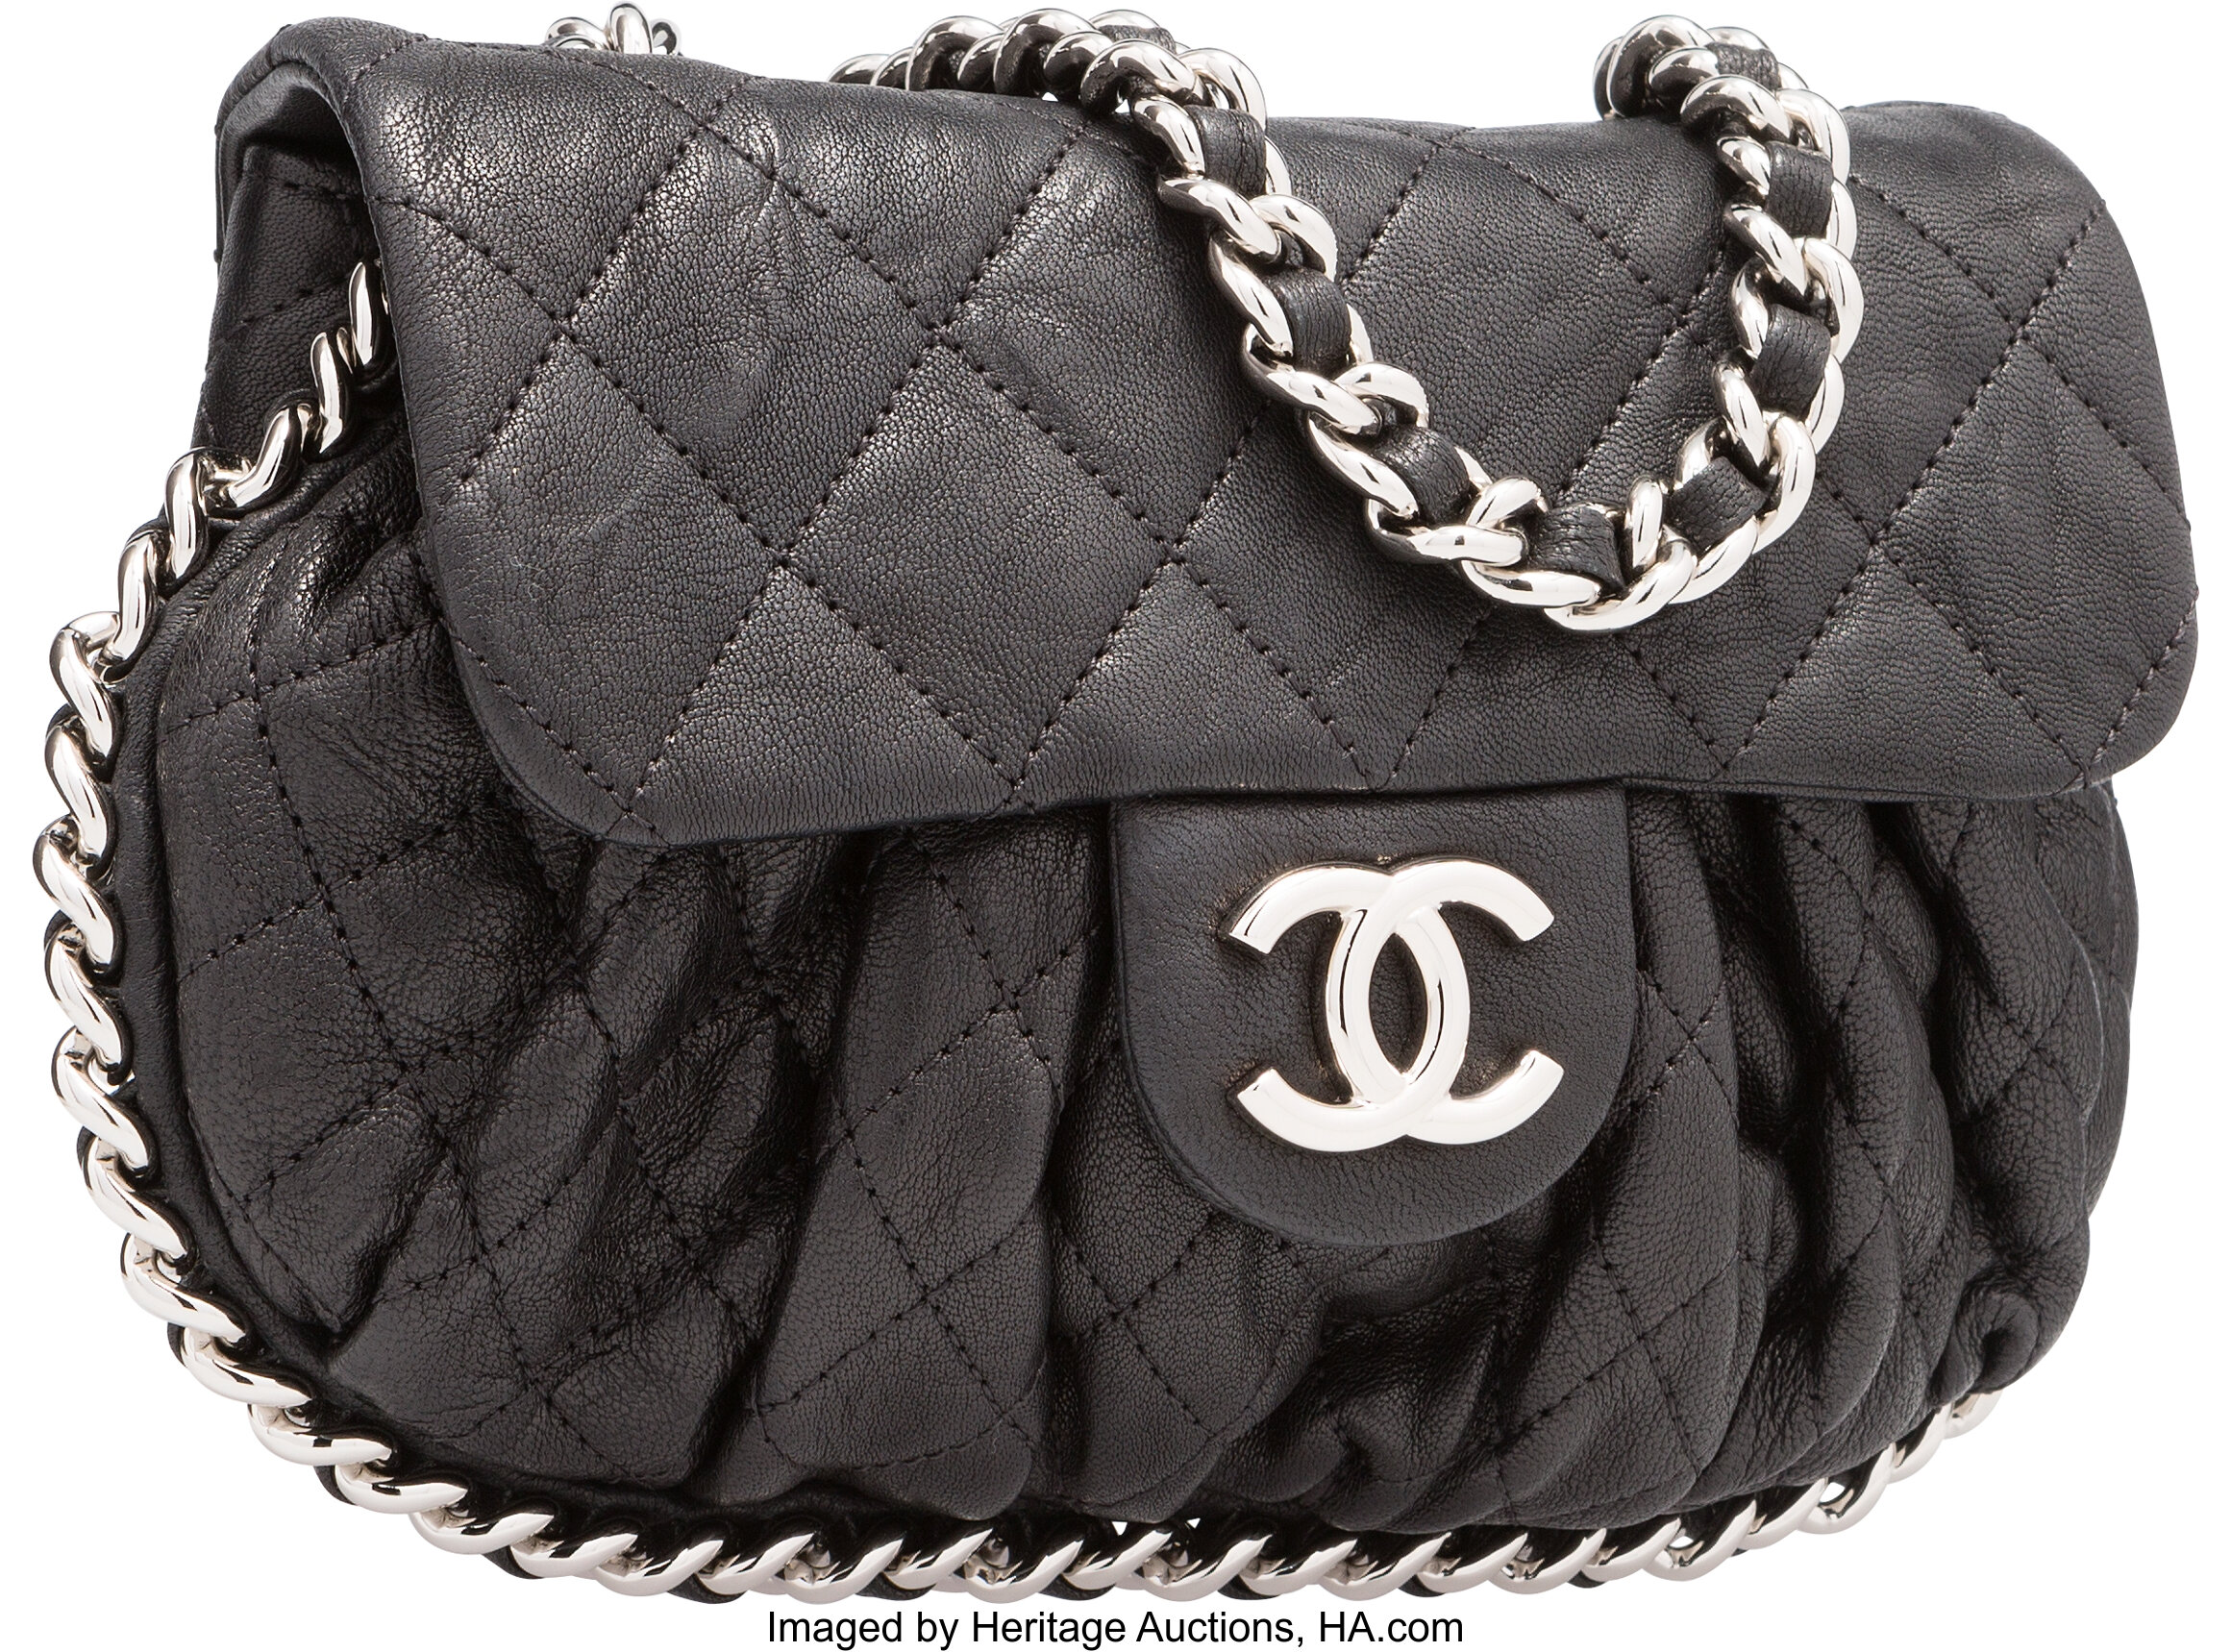 Chanel Black Shearling & Houndstooth Boucle Shopper Tote